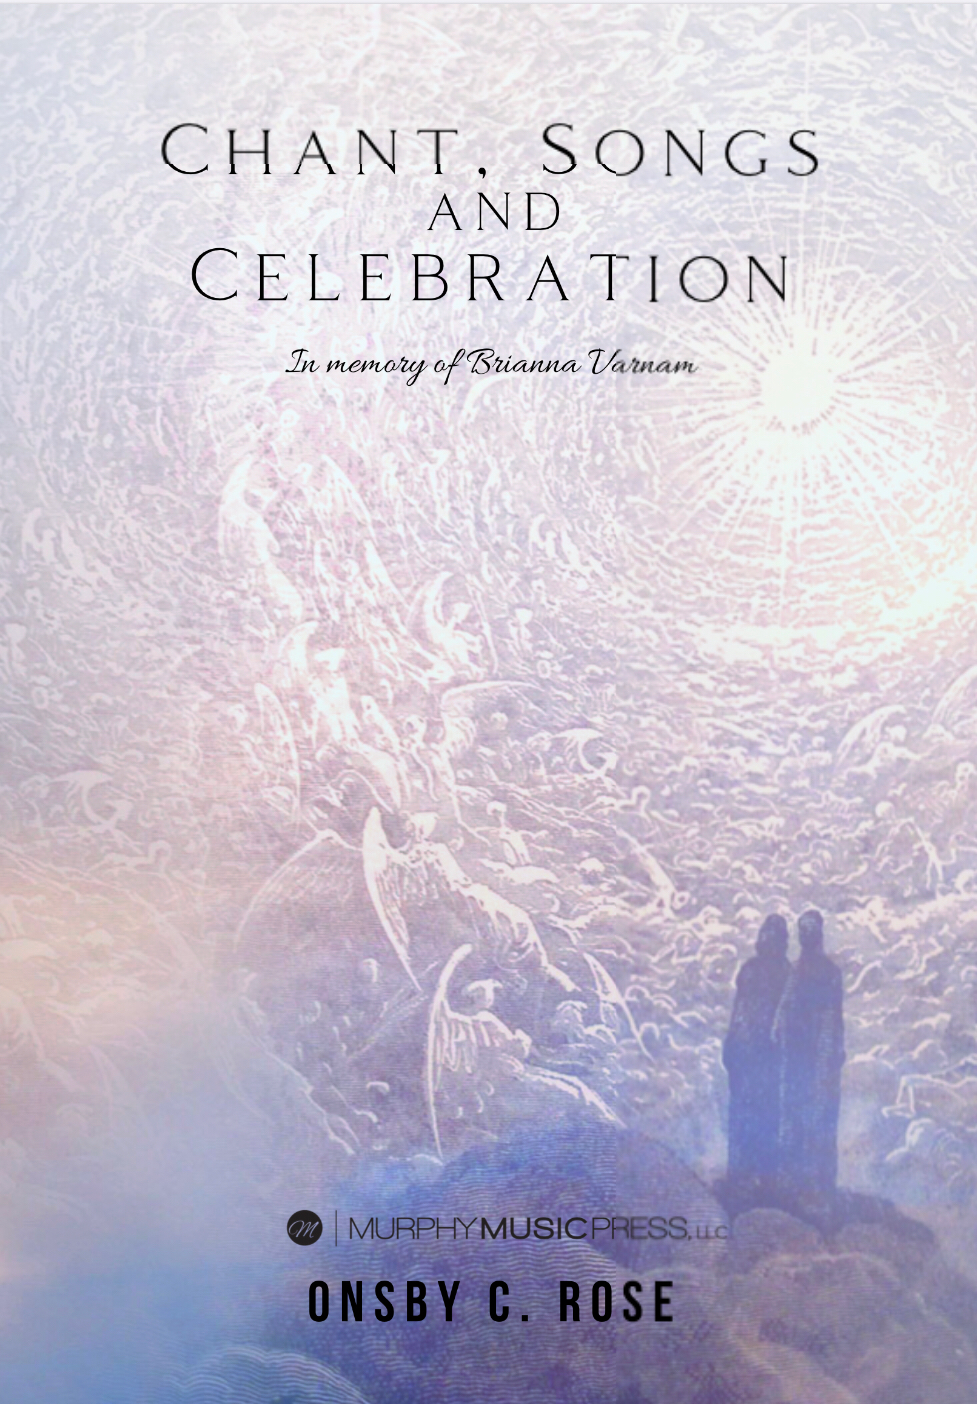 Chant, Songs, And Celebration by Onsby C. Rose